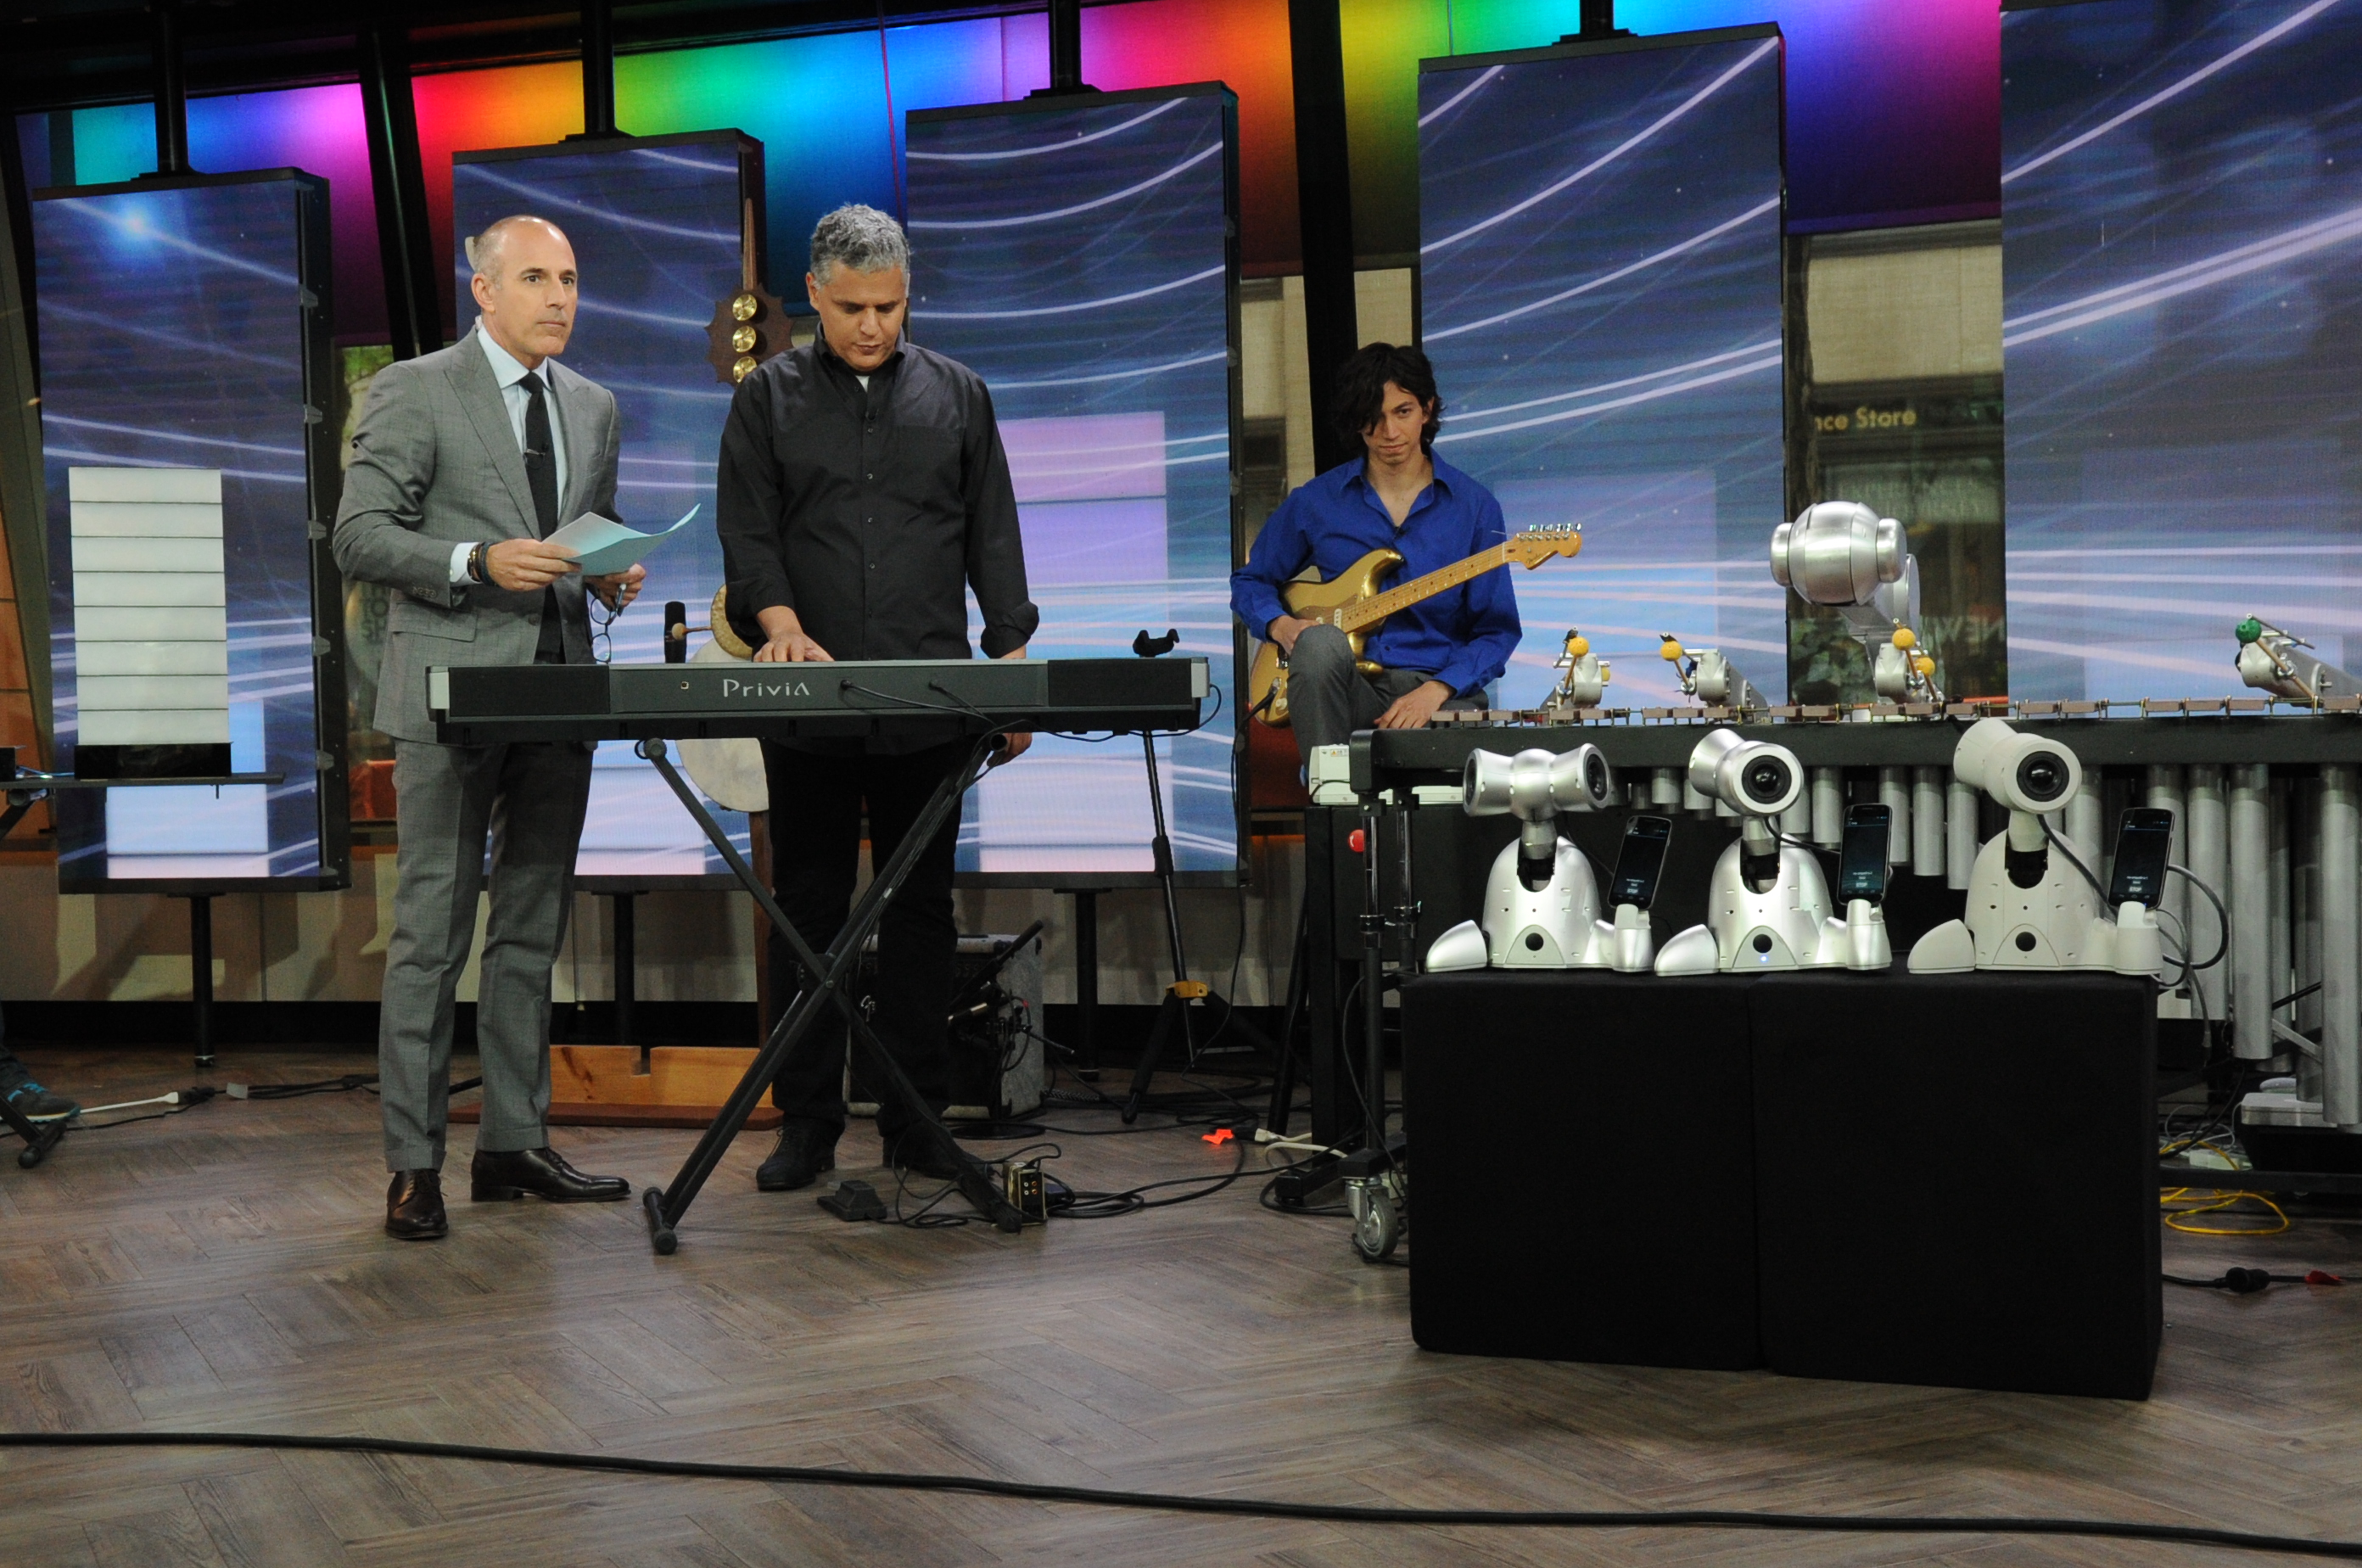 The Center for Music Technology was featured on NBC's TODAY Show on May 15, 2015.